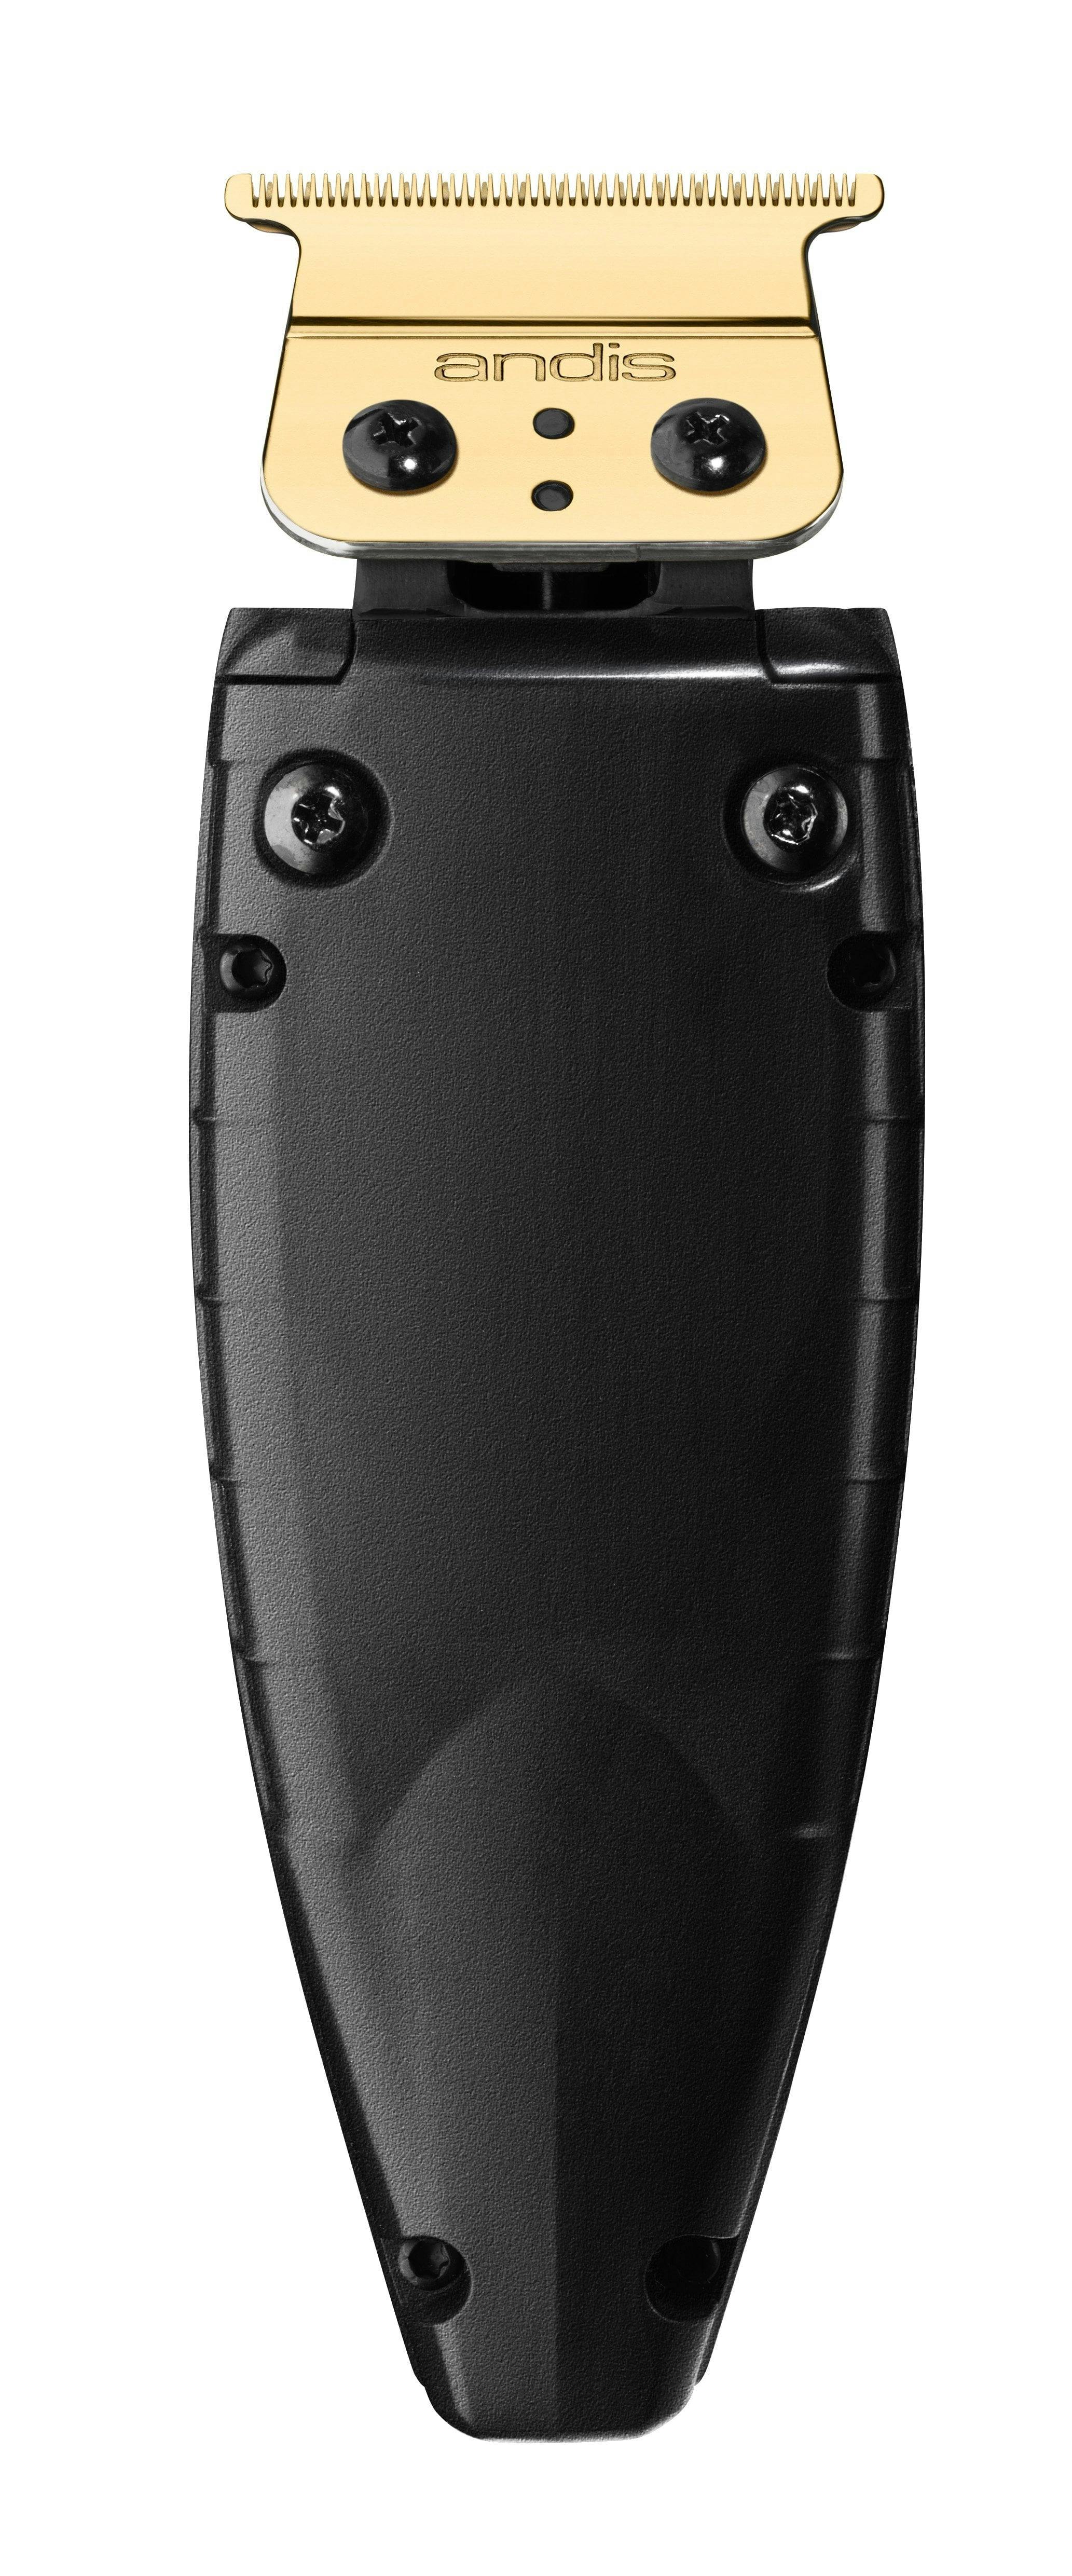 Andis GTX-EXO Cordless Trimmer